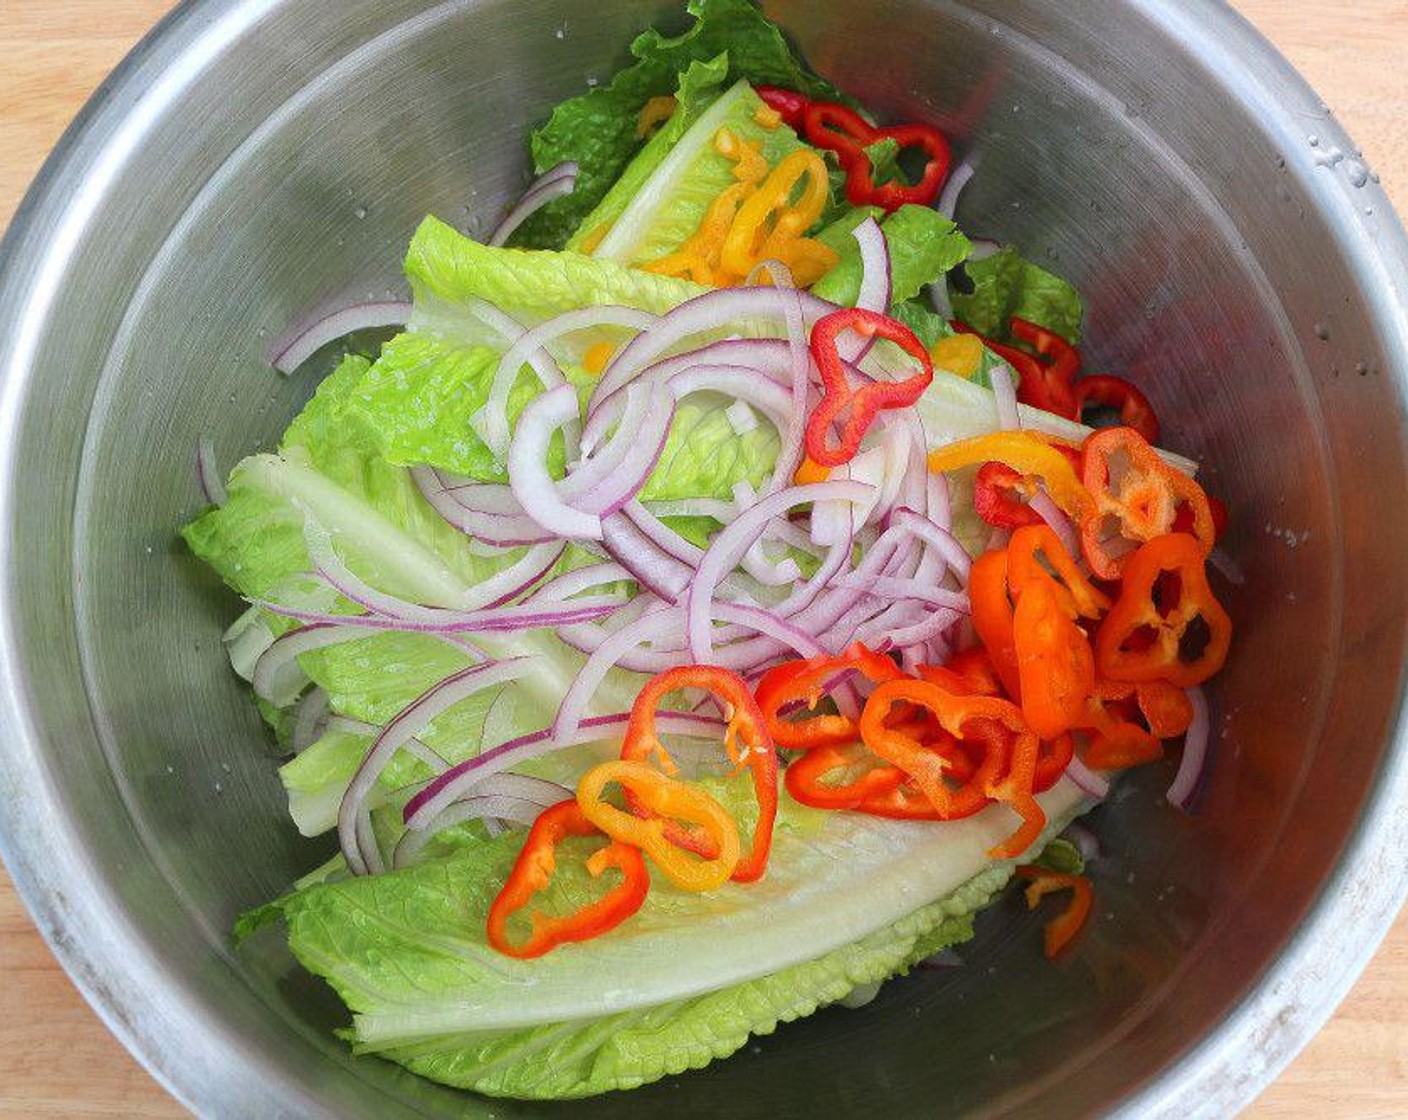 step 1 Dress Romaine Lettuce (to taste) leaves, Chili Peppers (to taste) and Red Onions (to taste) in a Vinaigrette (to taste) of your choice.